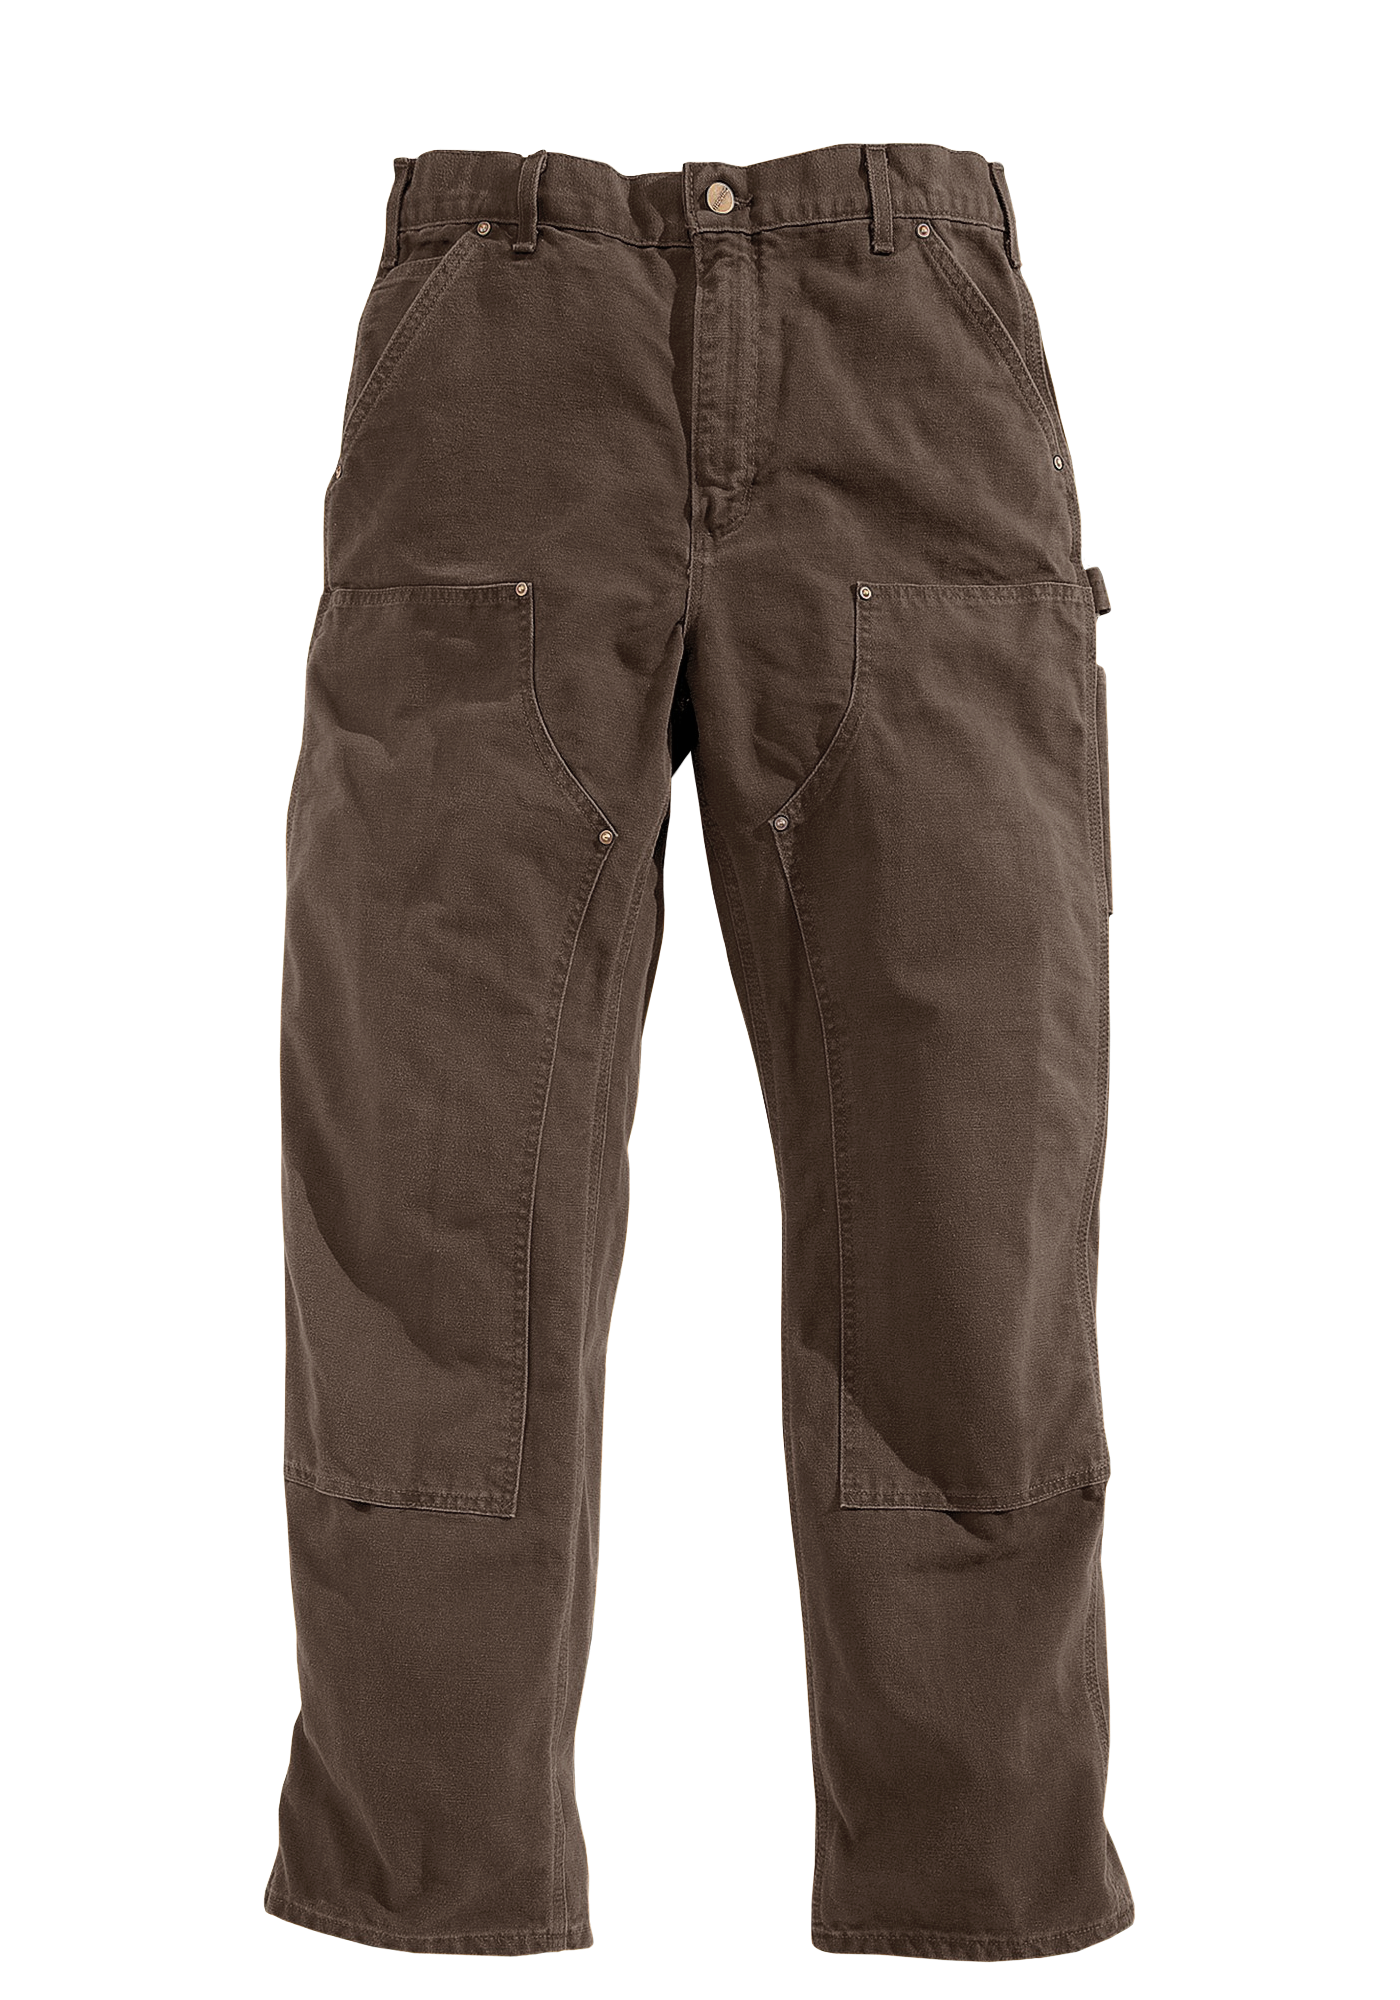 Carhartt Washed-Duck Double Front Loose fit Work Pants, #B136